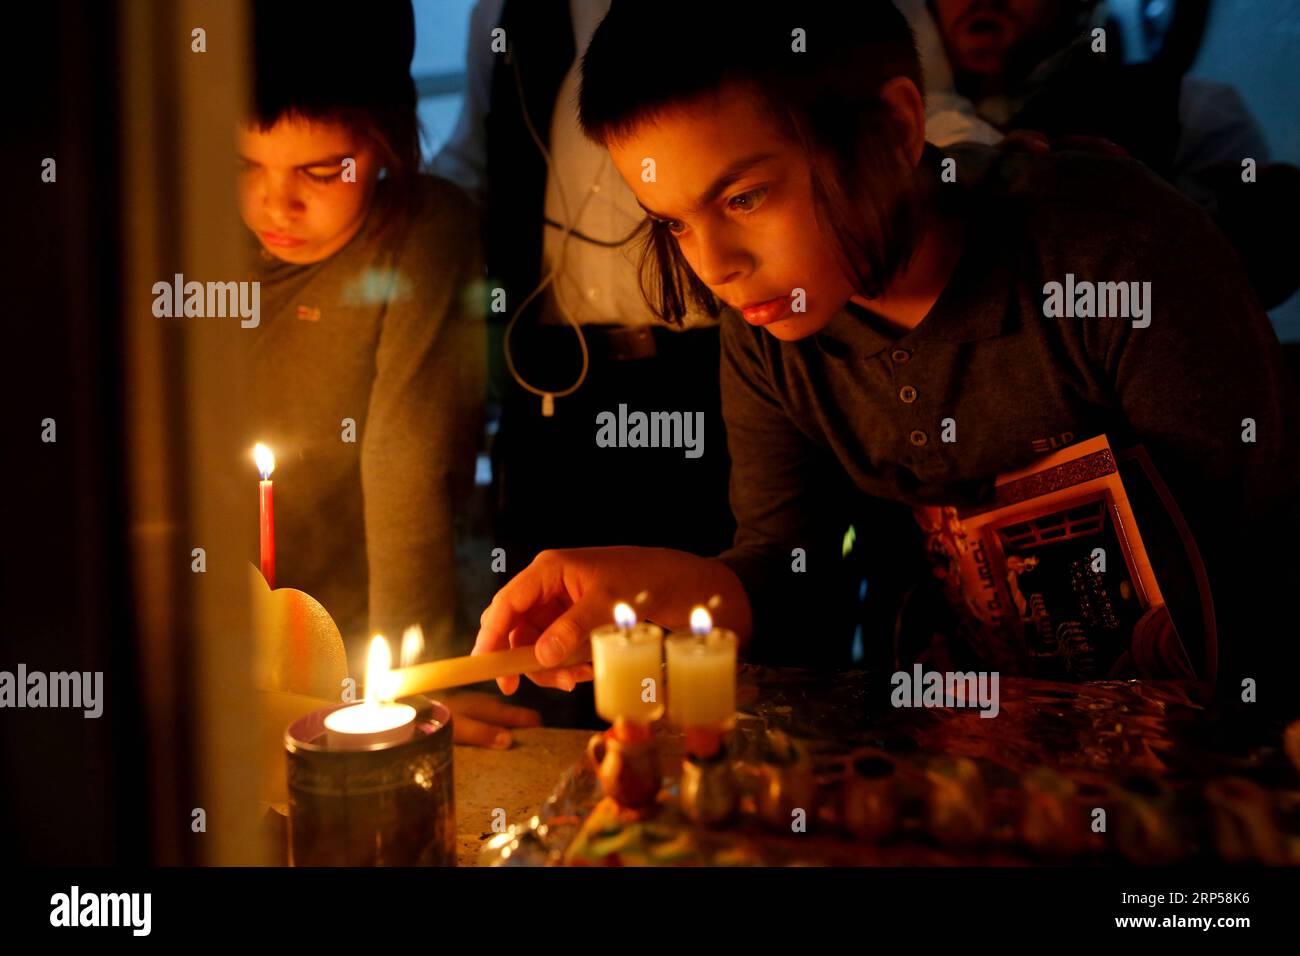 (181203) -- JERUSALEM, Dec. 3, 2018 -- An ultra-Orthodox Jewish young man lights a candle during Hanukkah in Mea Shearim neighborhood in Jerusalem, on Dec. 3, 2018. Hanukkah, also known as the Festival of Lights and Feast of Dedication, is an eight-day Jewish holiday commemorating the rededication of the Holy Temple (the Second Temple) in Jerusalem at the time of the Maccabean Revolt against the Seleucid Empire of the 2nd Century B.C. ) MIDEAST-JERUSALEM-HANUKKAH GilxCohenxMagen PUBLICATIONxNOTxINxCHN Stock Photo